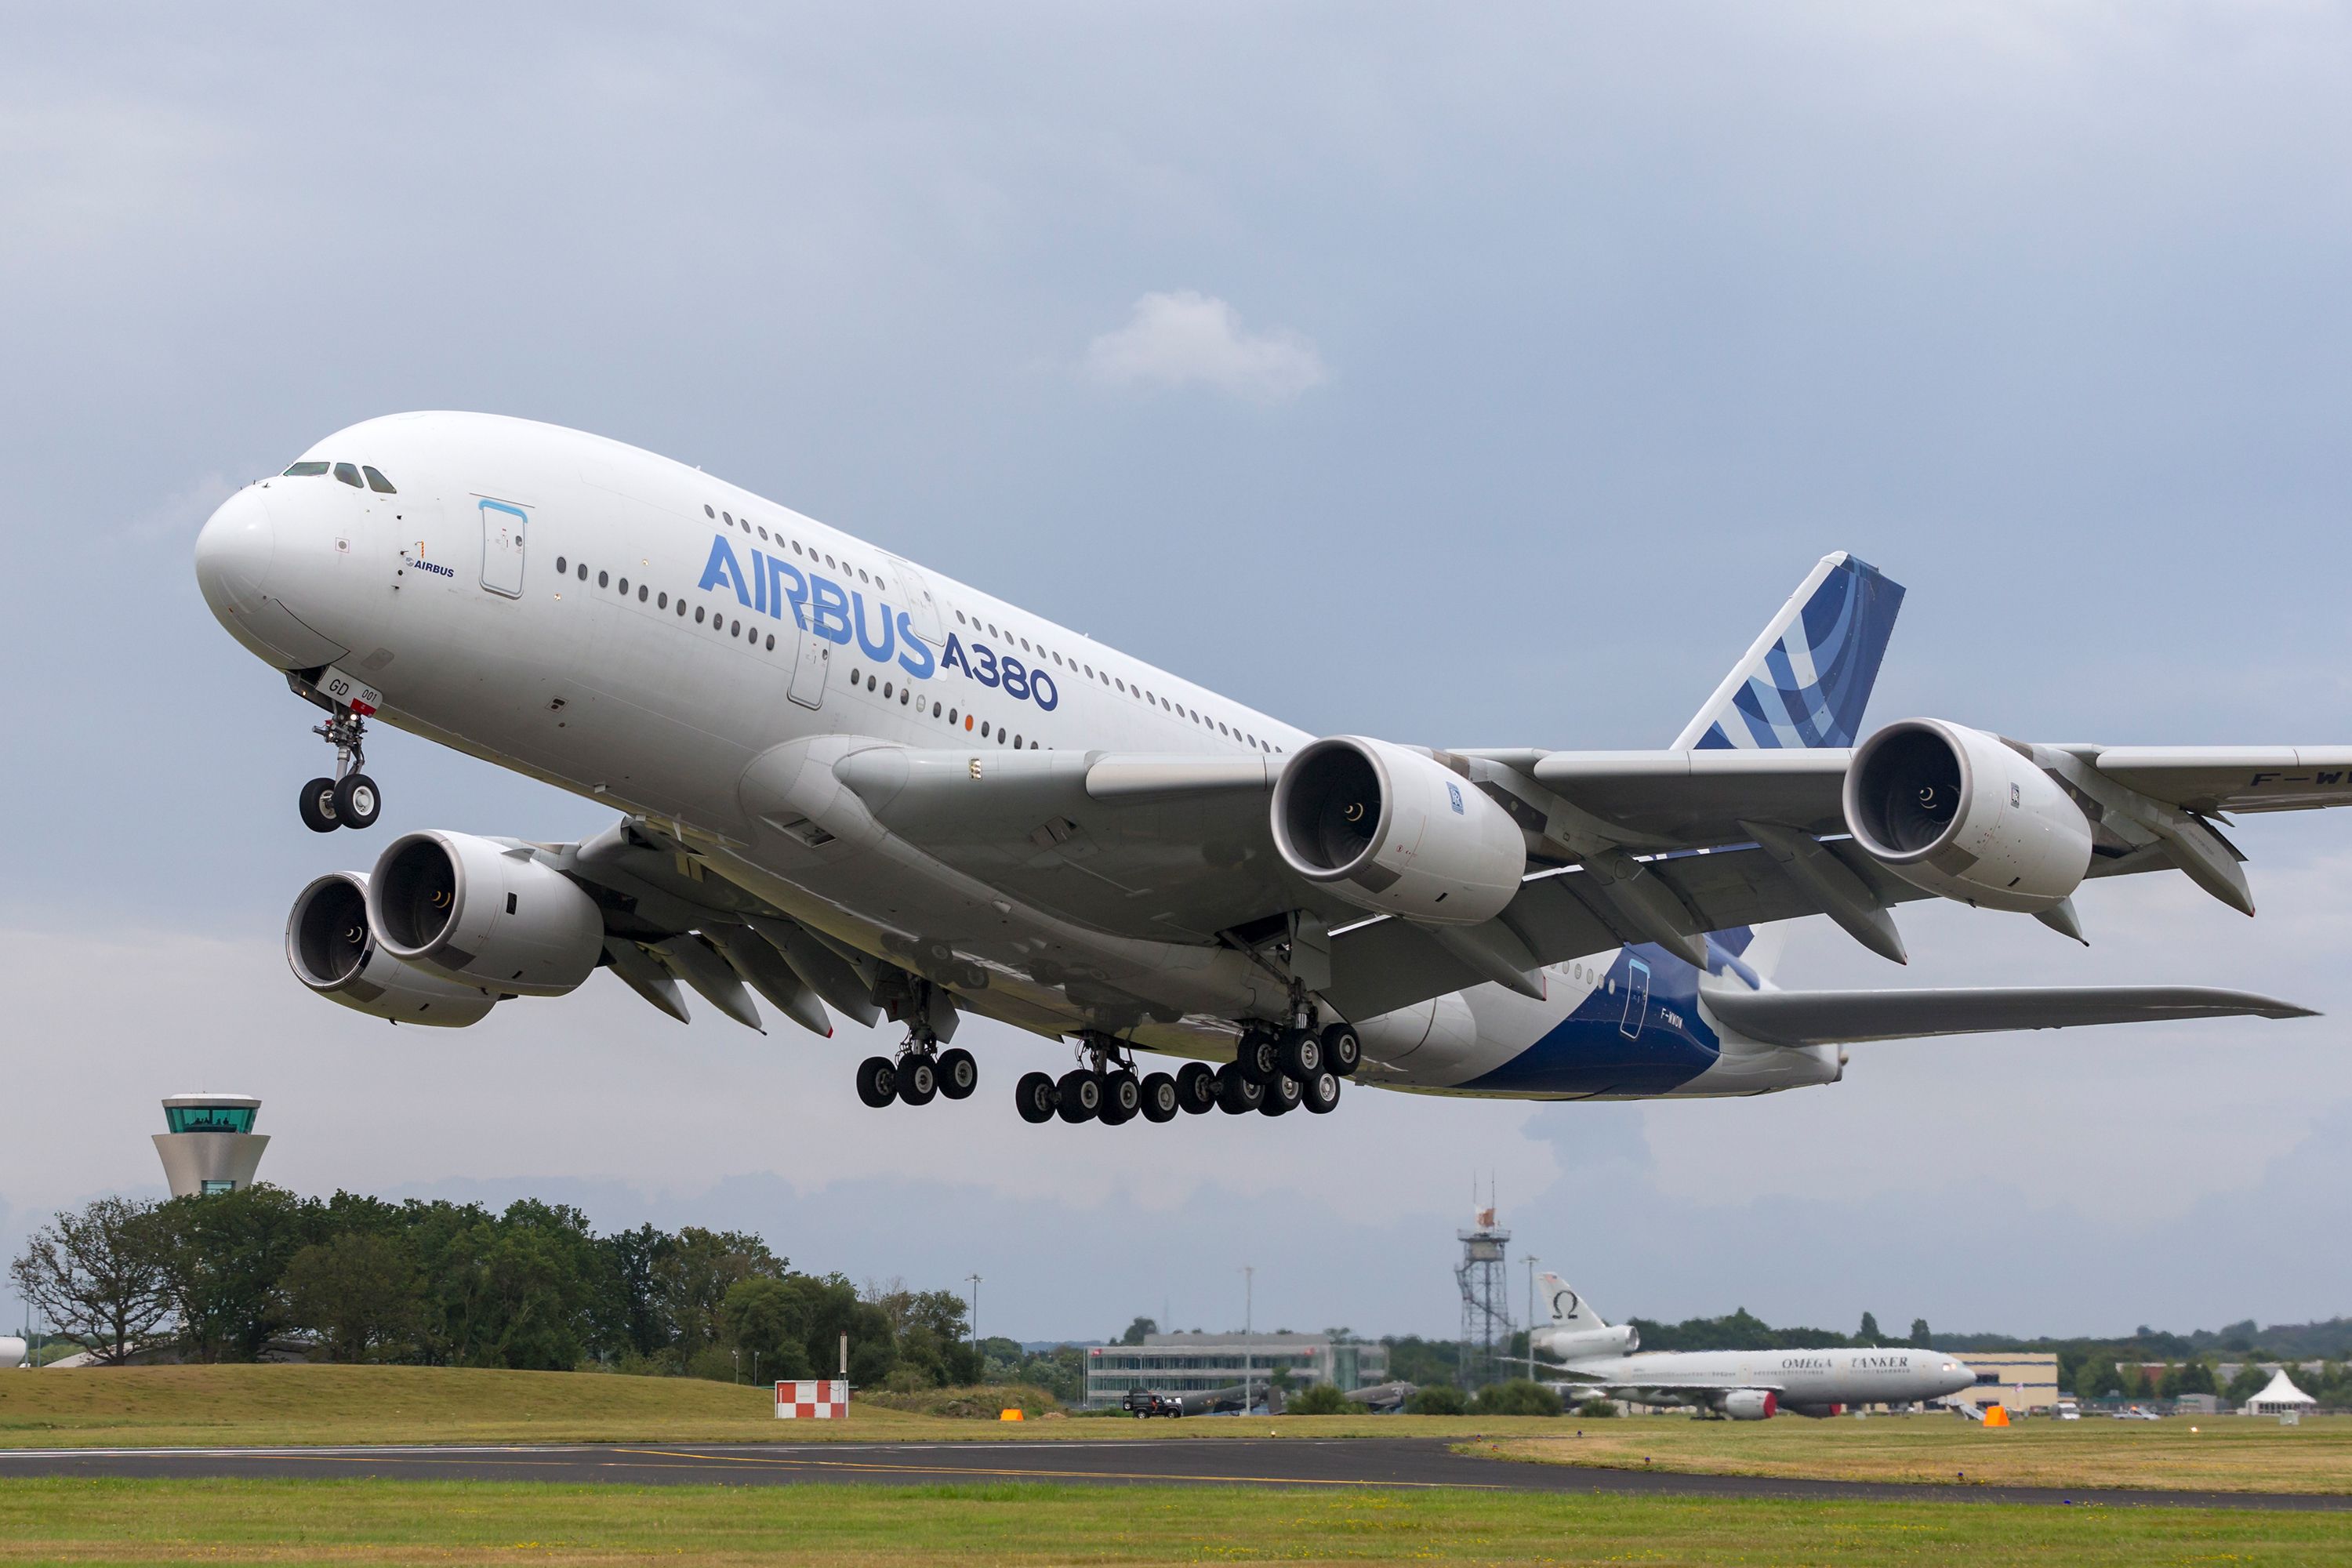 Airbus A380 with Rolls-Royce Trent 900 engines departing shutterstock_1258407763